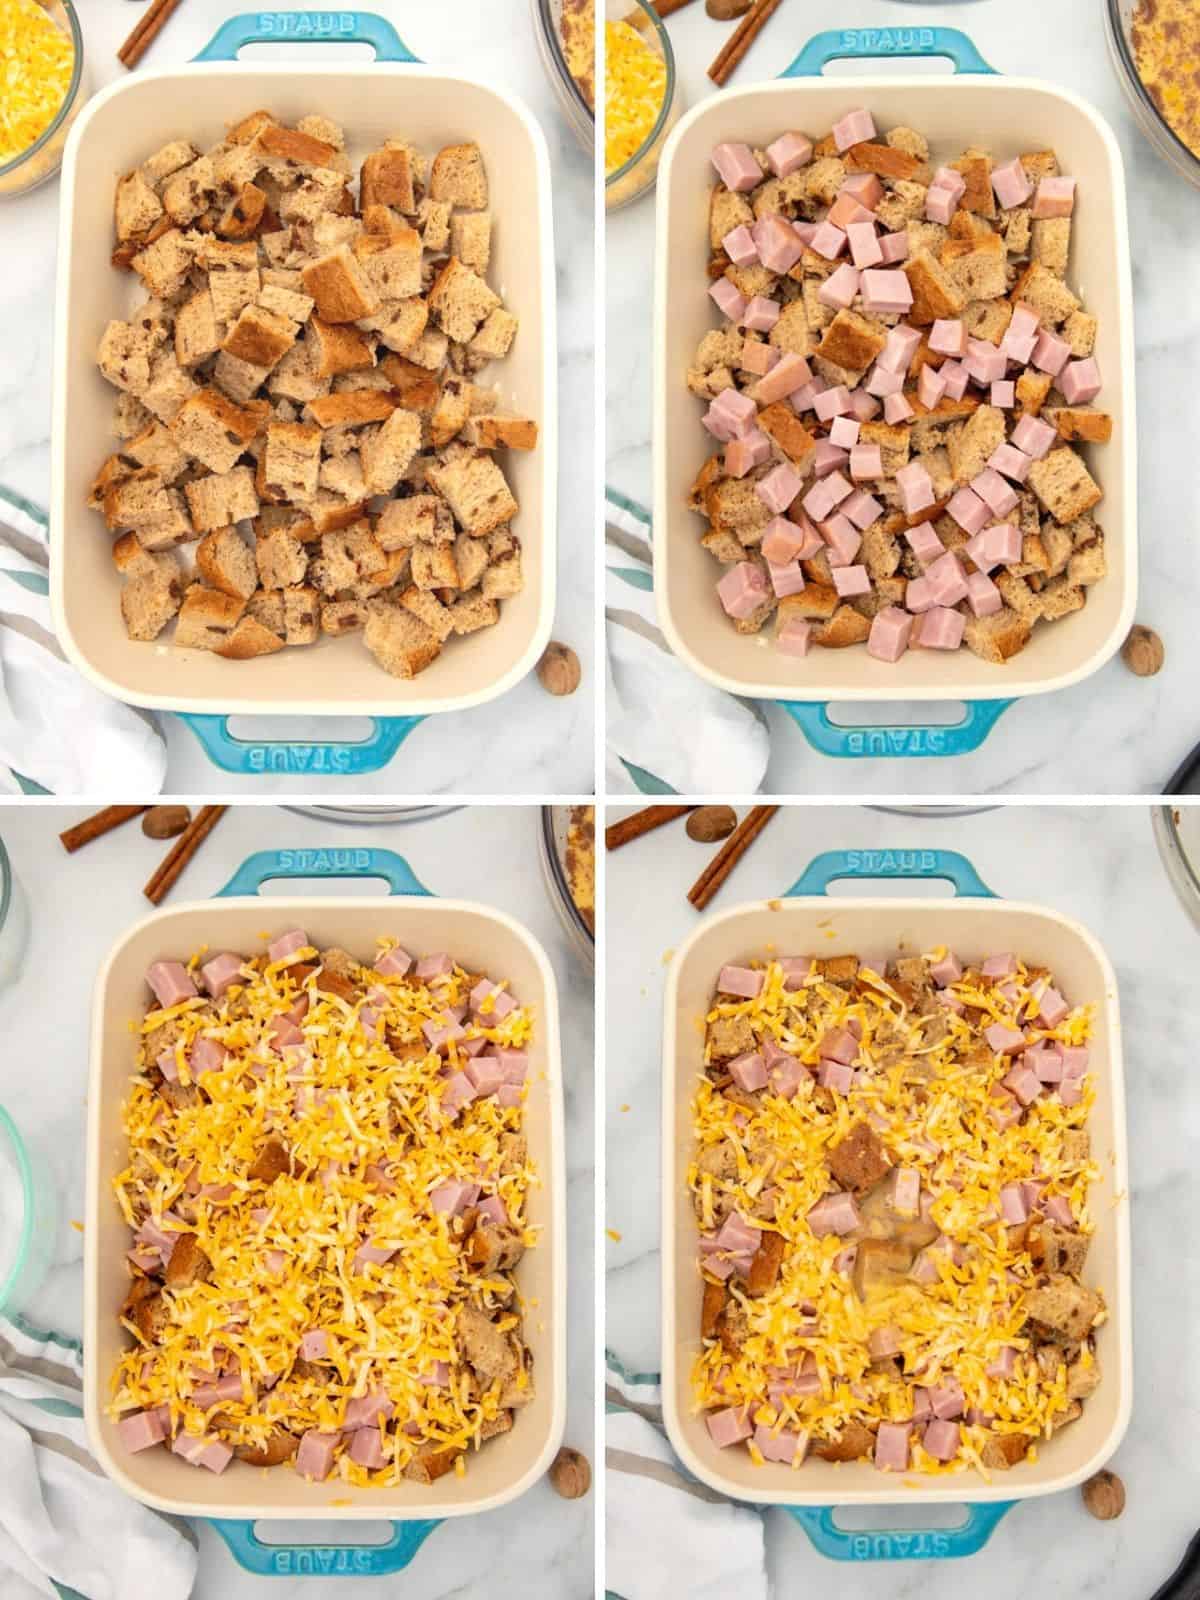 Collage of 4 pictures showing steps of layering bread, ham, cheese, and eggs in casserole dish. 